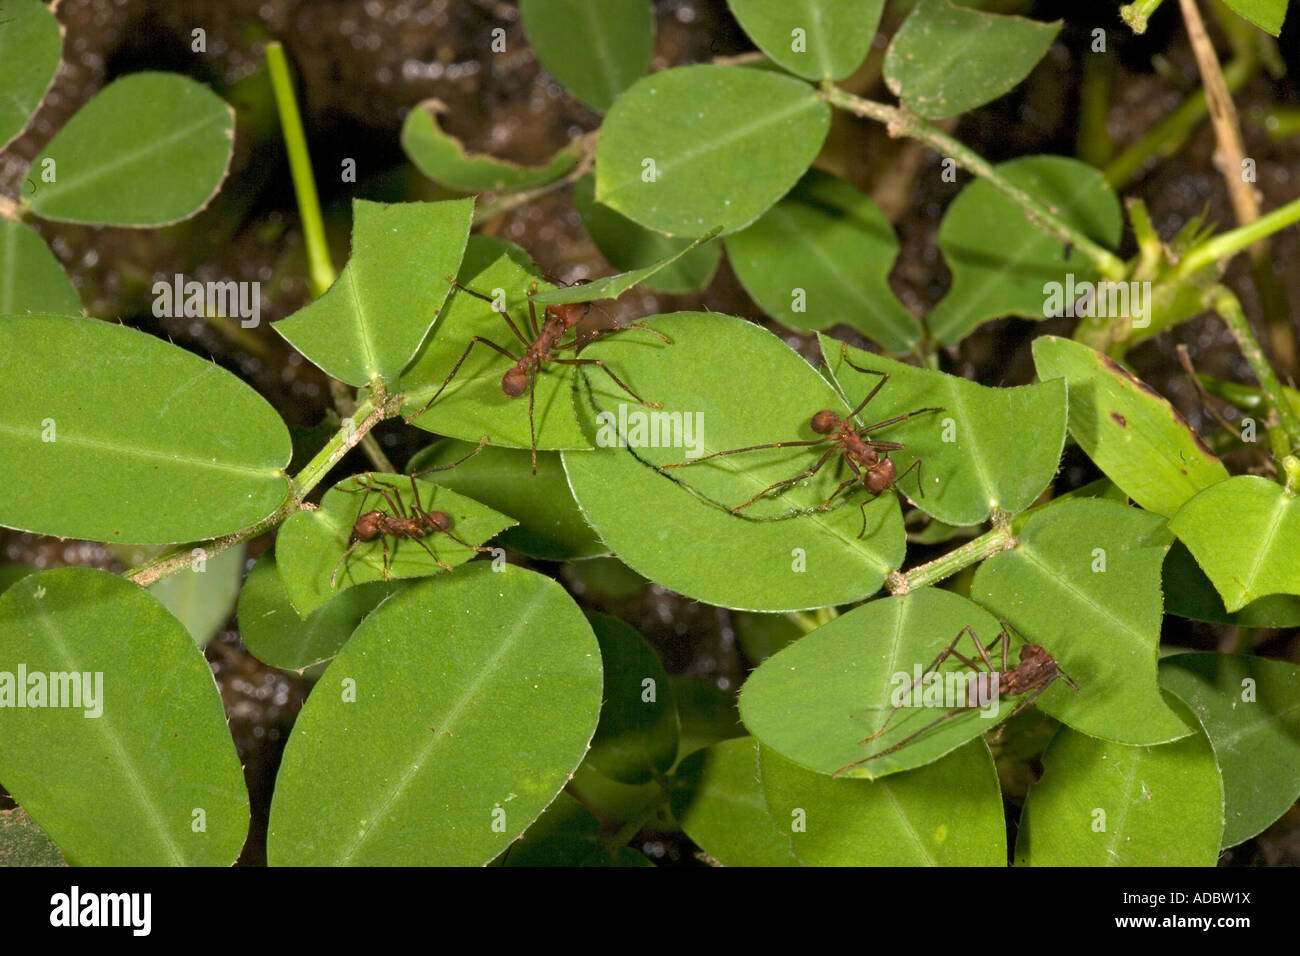 Leaf cutter ants, Atta cephalotes Stock Photo